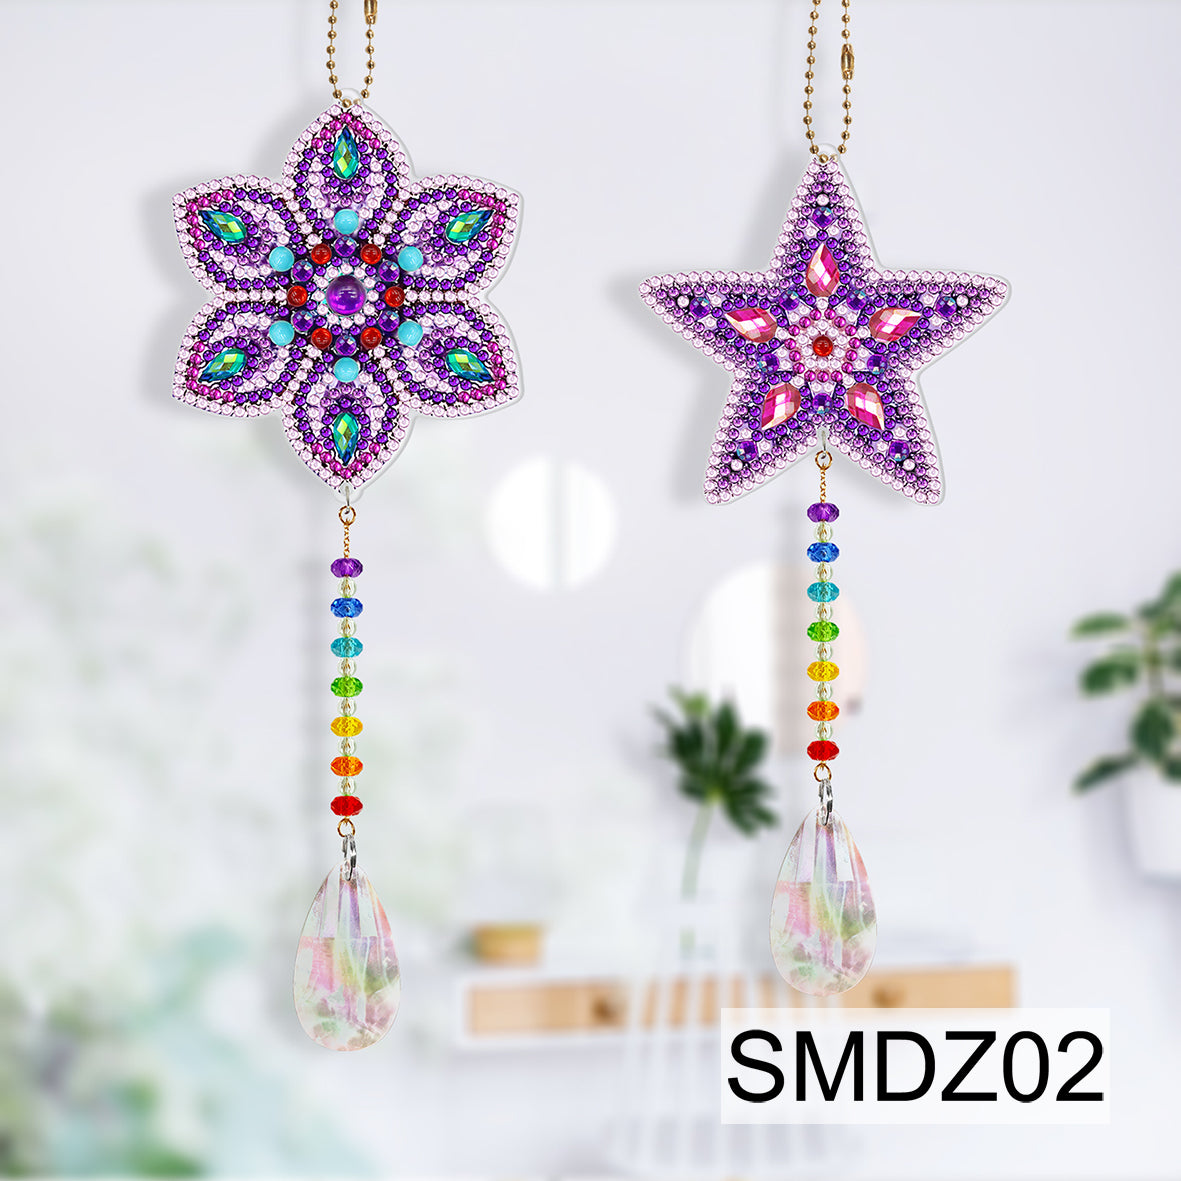 2pcs Special Shaped Crystal Wind Chimes